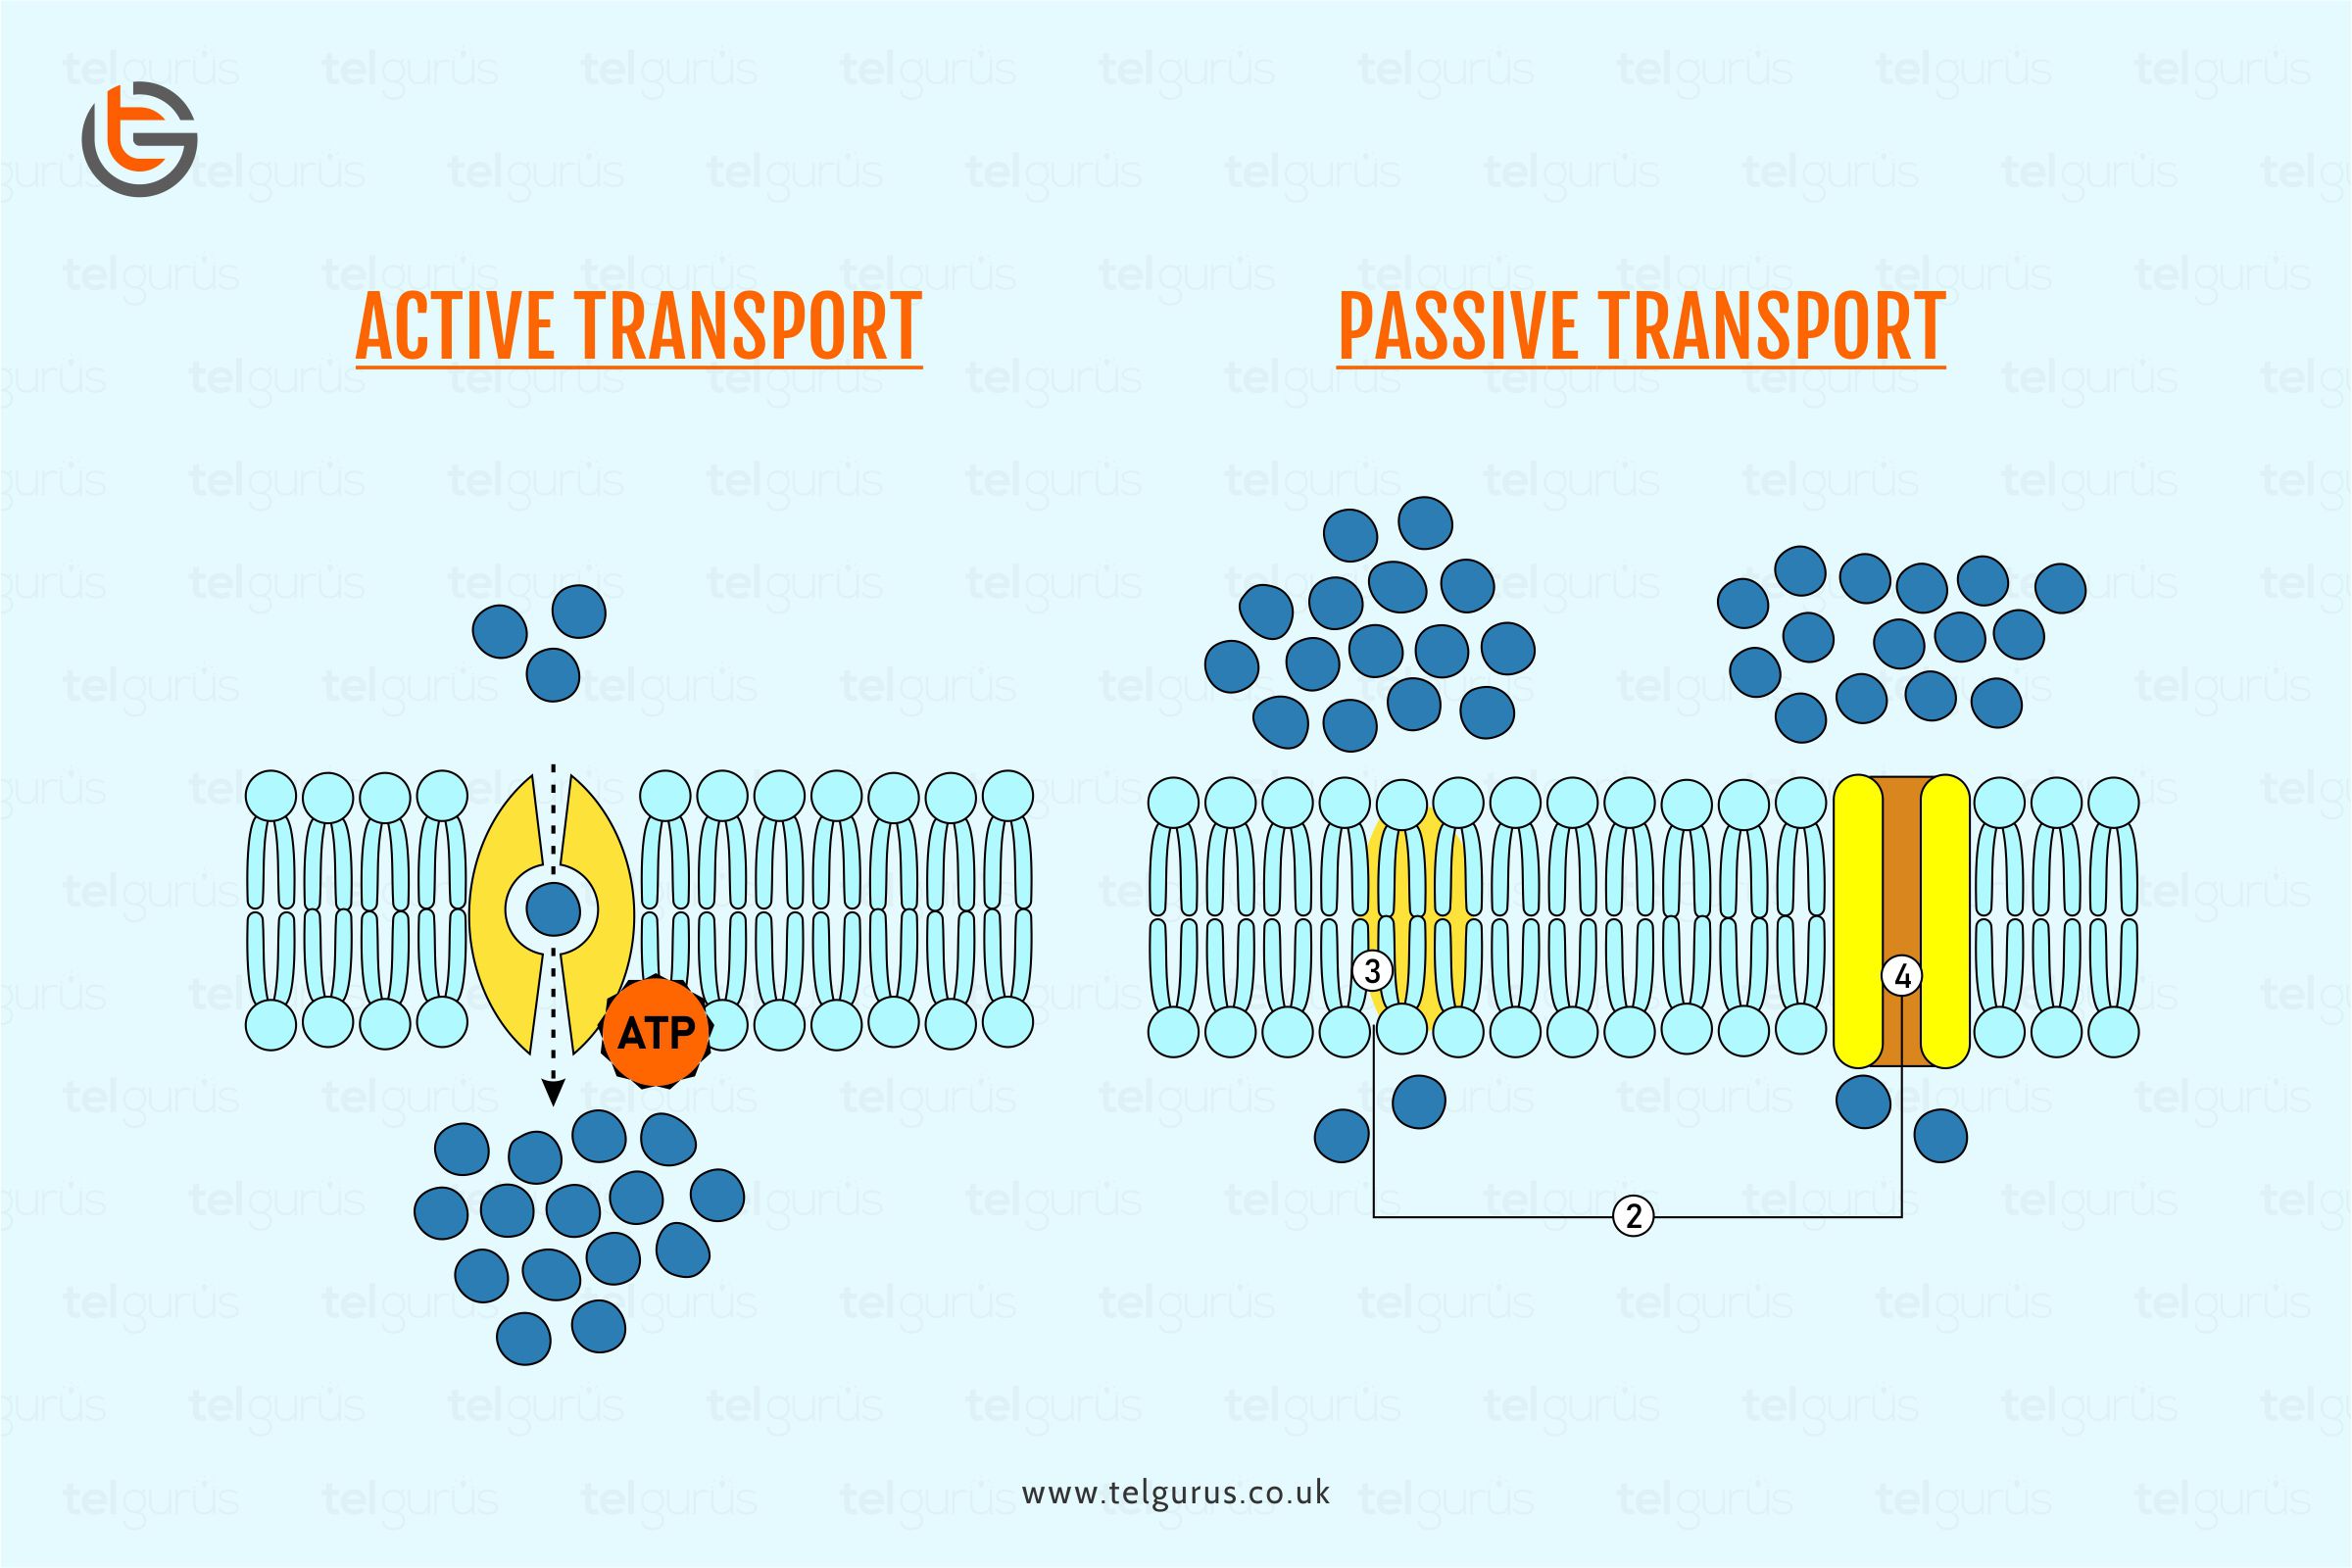 What is the difference between diffusion and active transport?